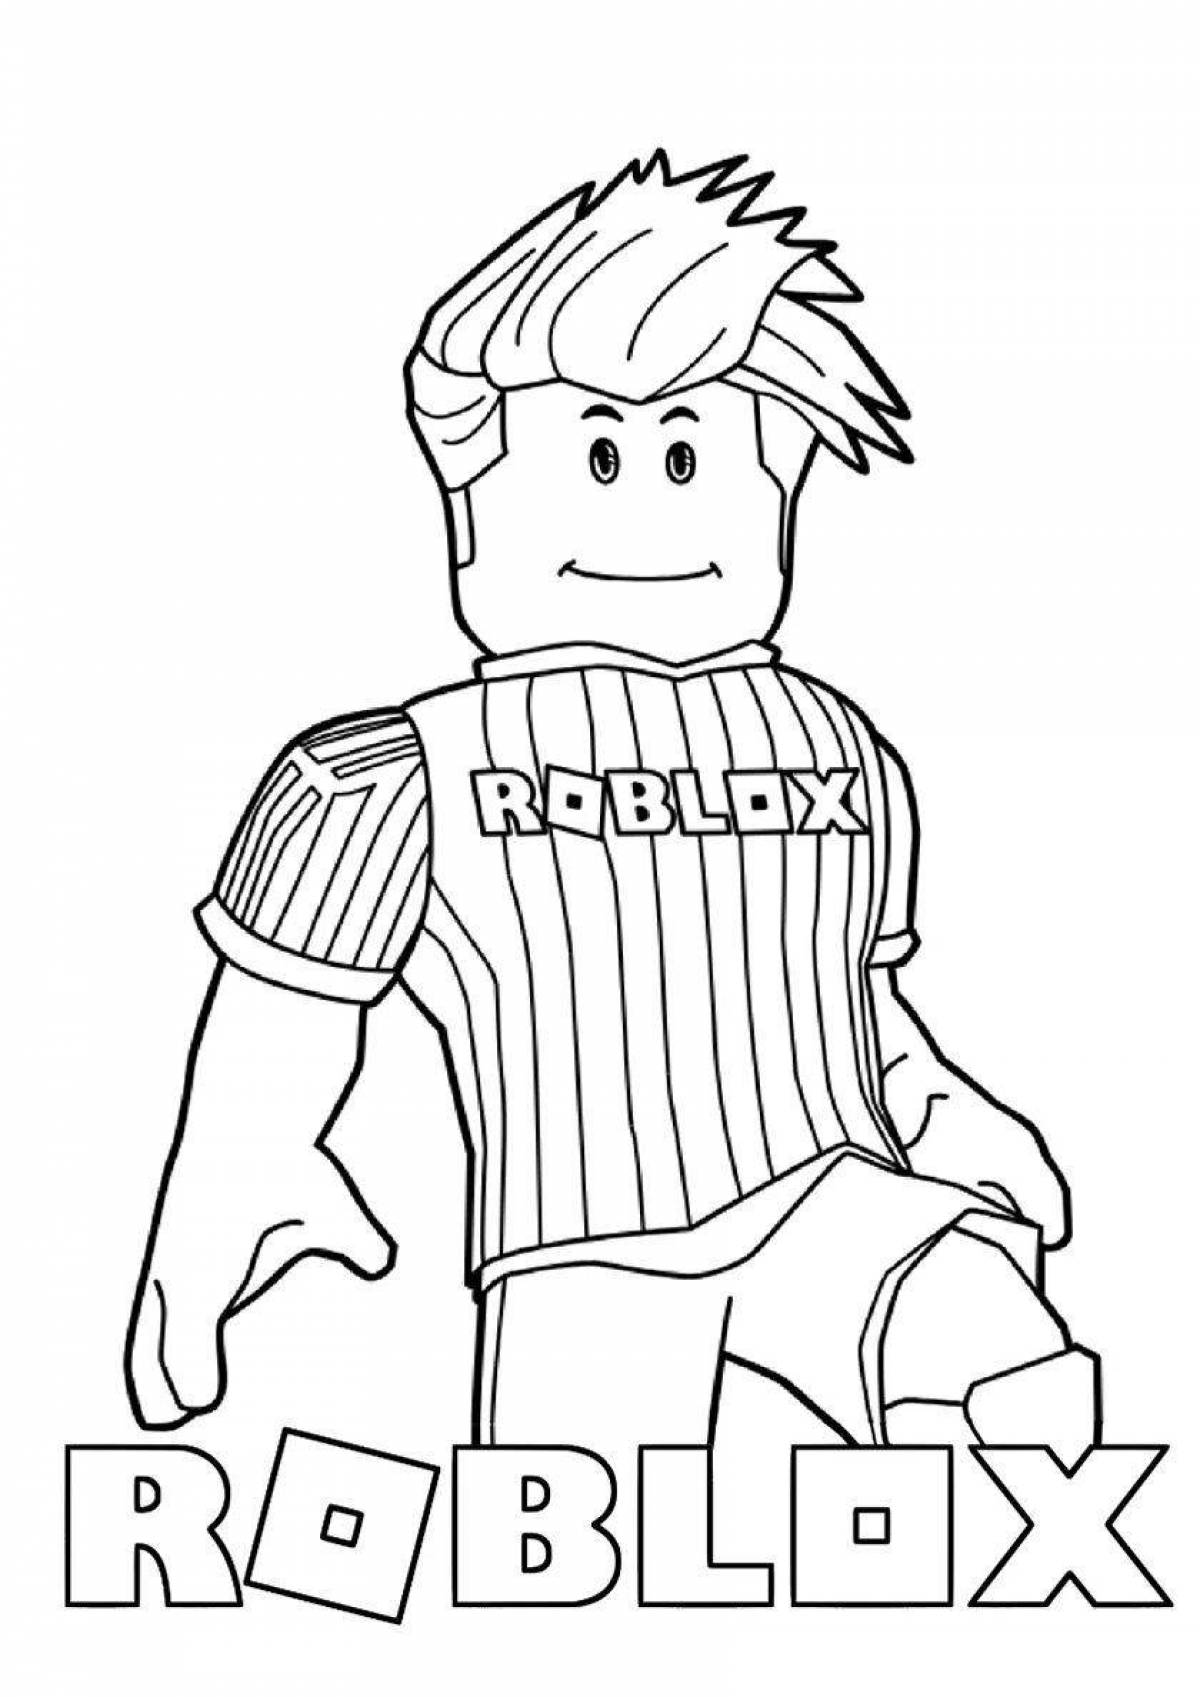 Roblox heroes awesome coloring pages